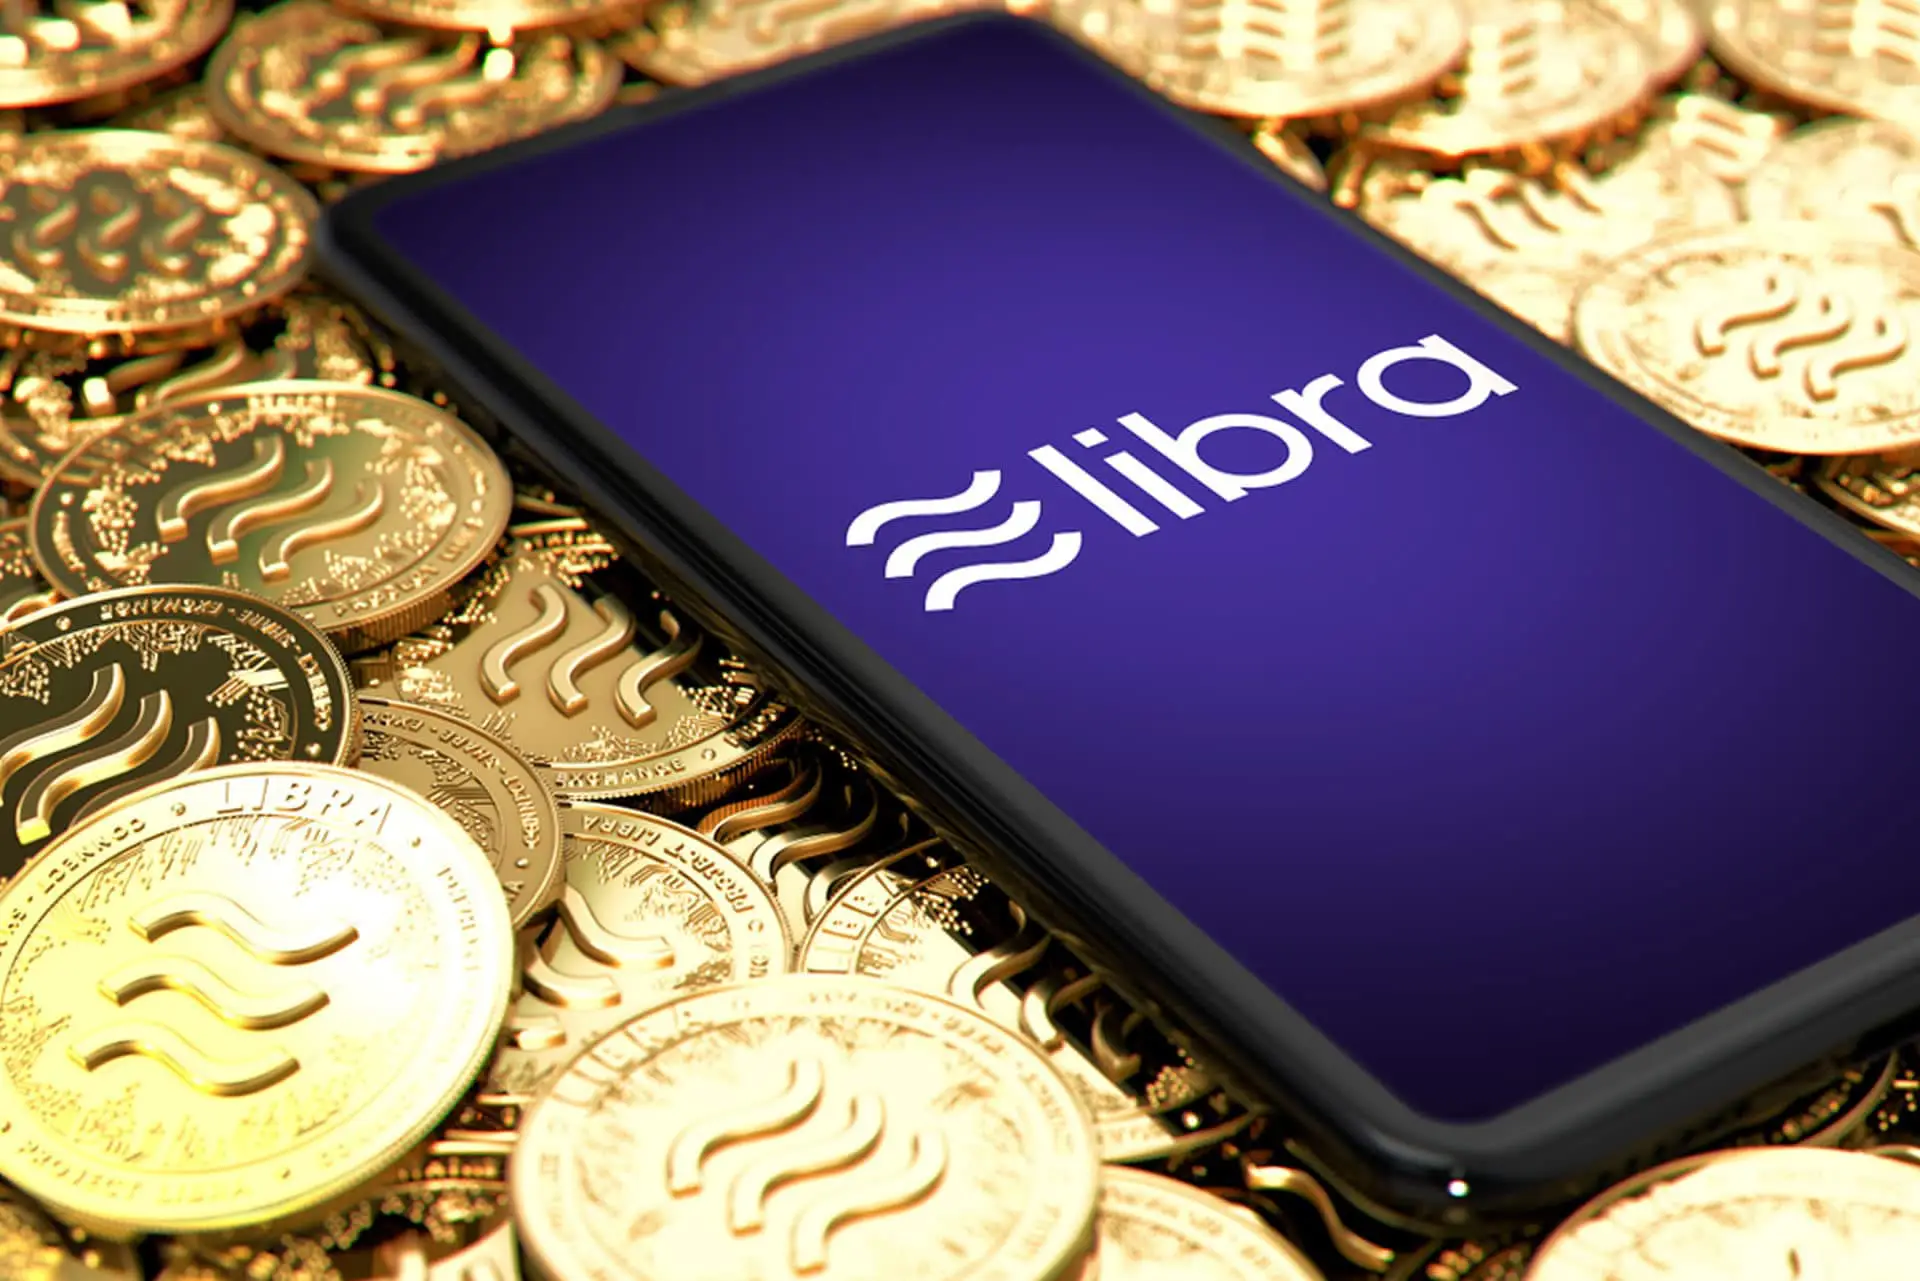 Libra Currency by Facebook